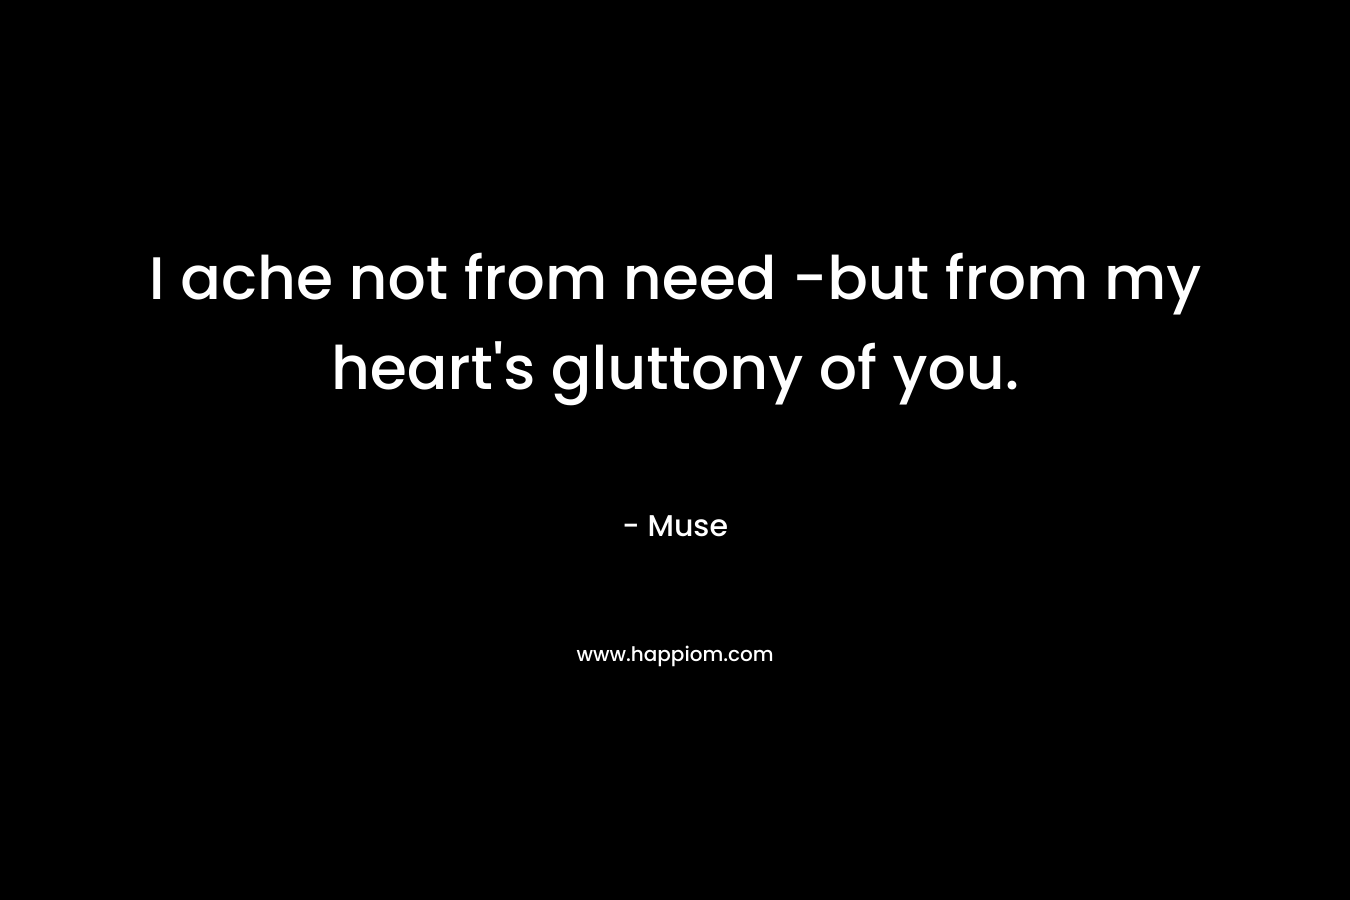 I ache not from need -but from my heart’s gluttony of you. – Muse